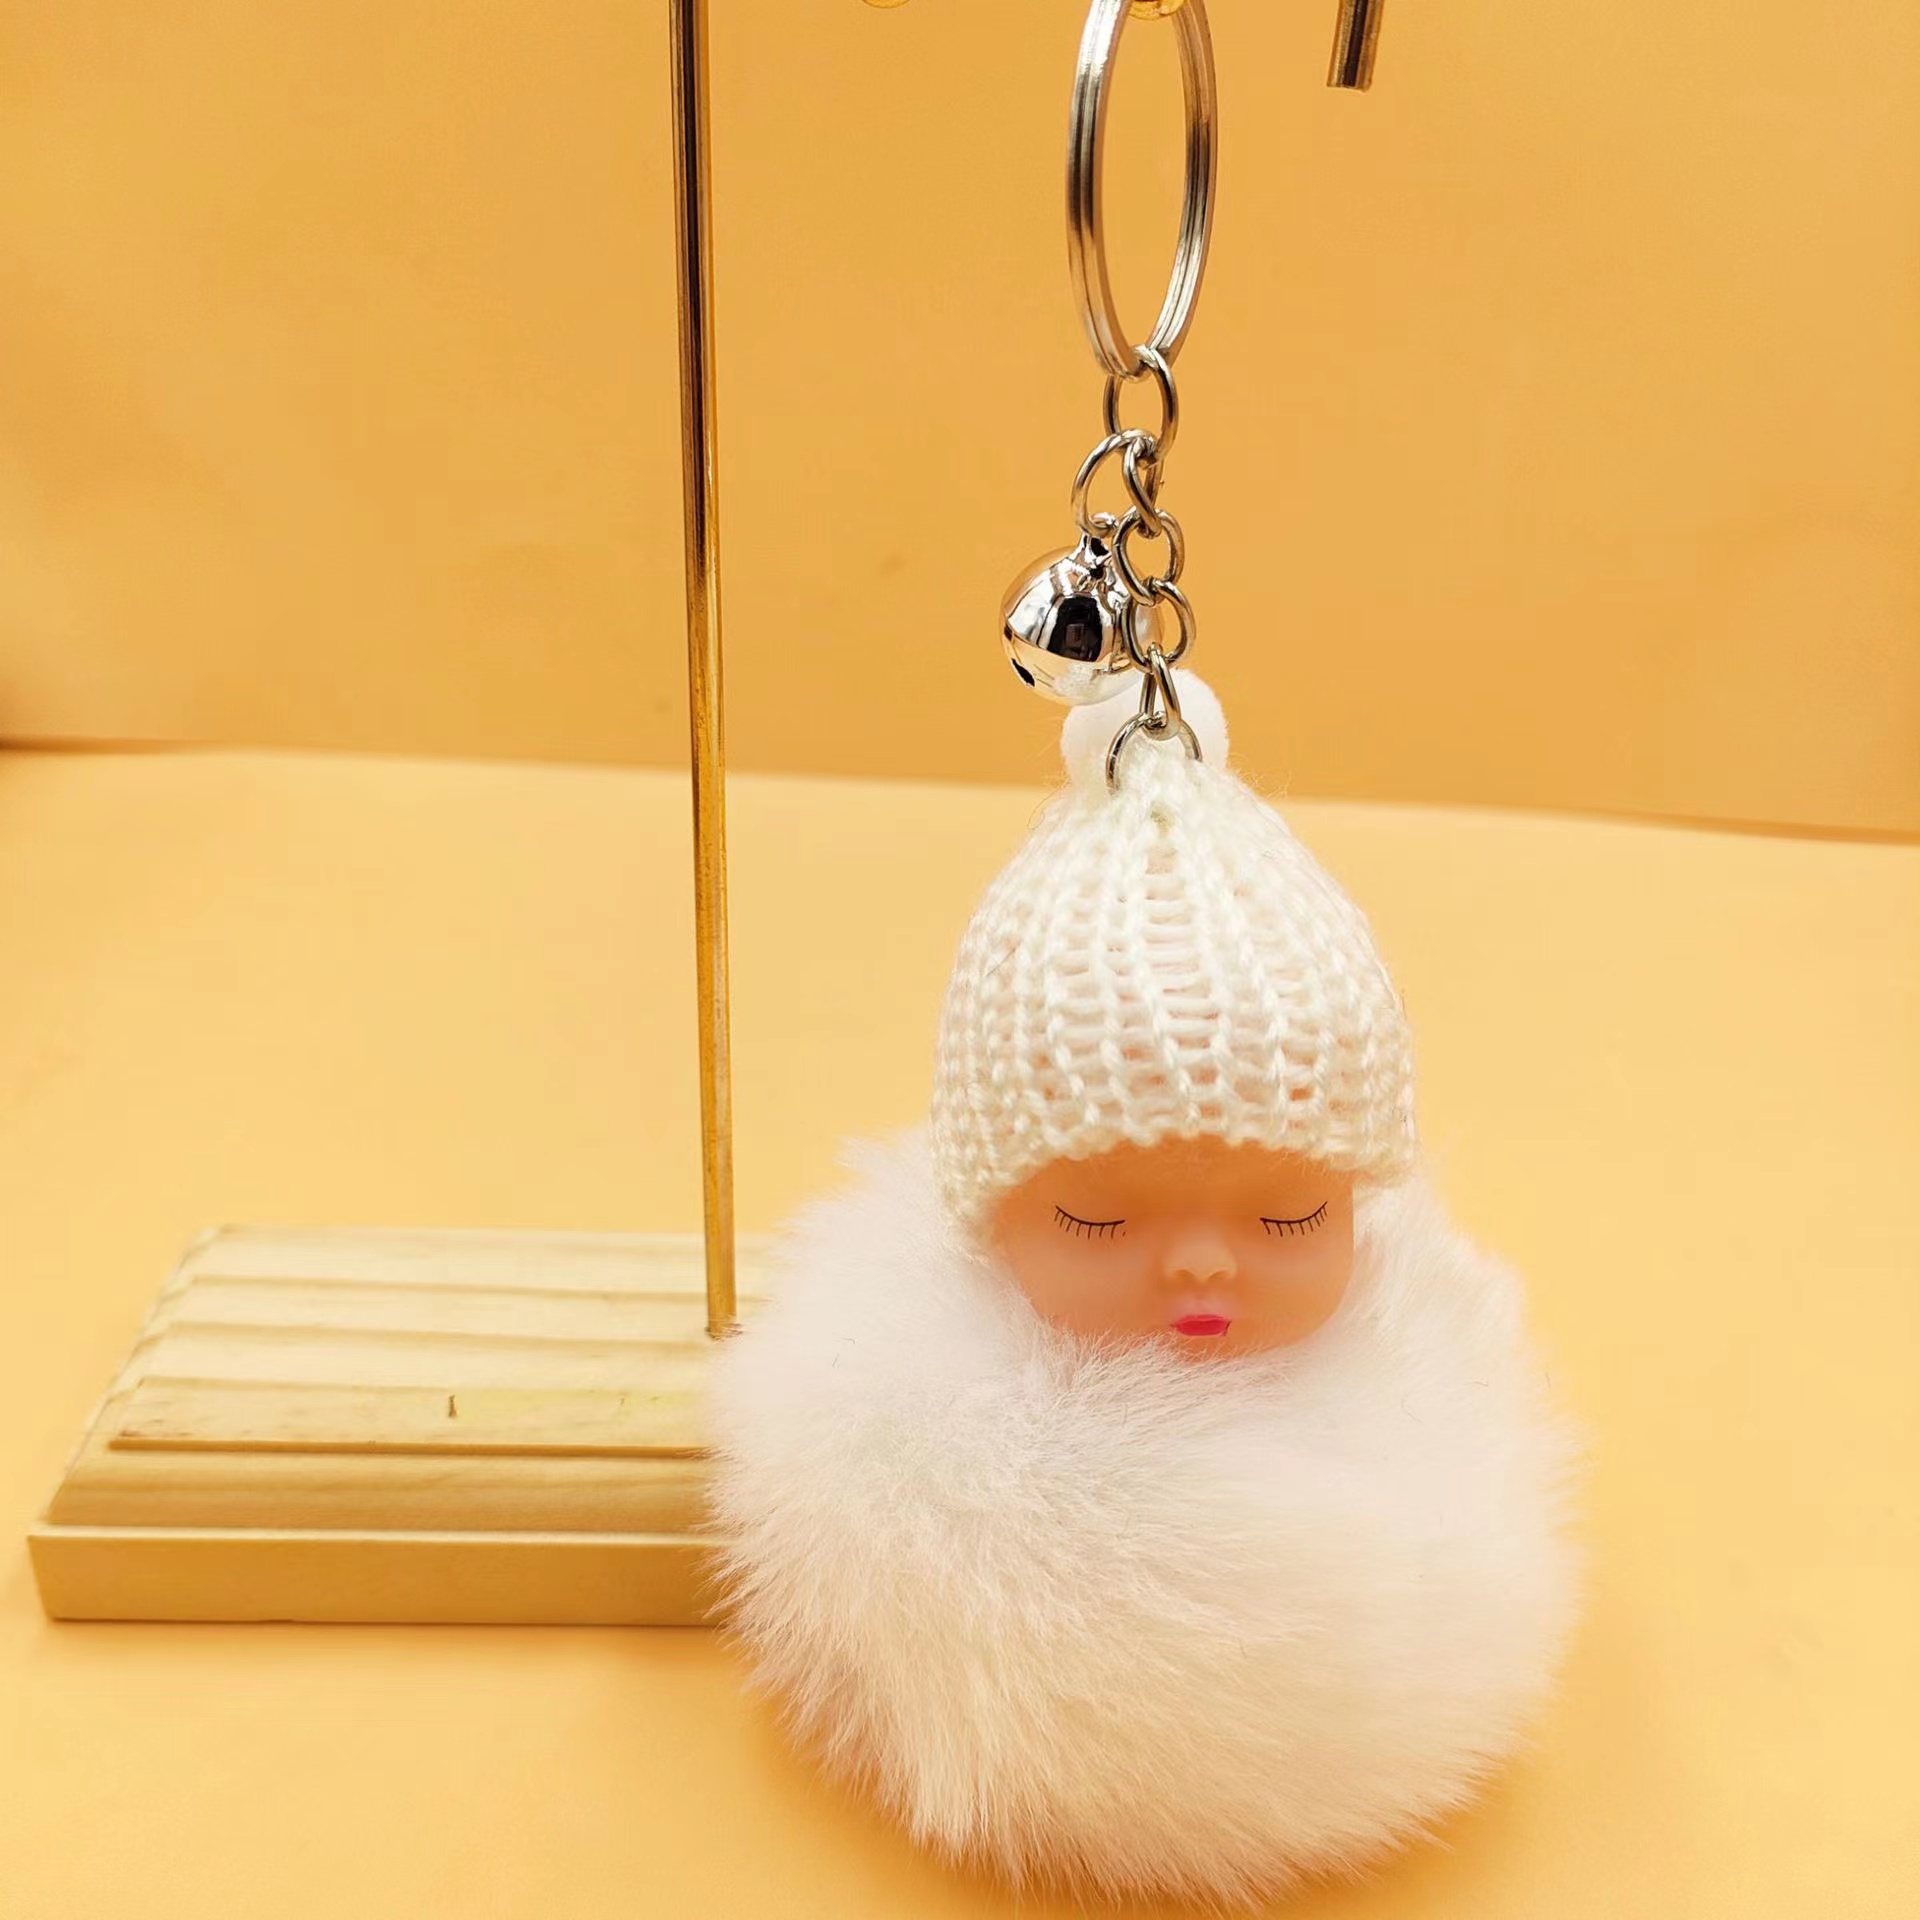 MOONBOHO Pompom Smiling Baby Keychains Cute Fluffy Plush Doll Key Chain for Women Girl Bags Pendant Cars